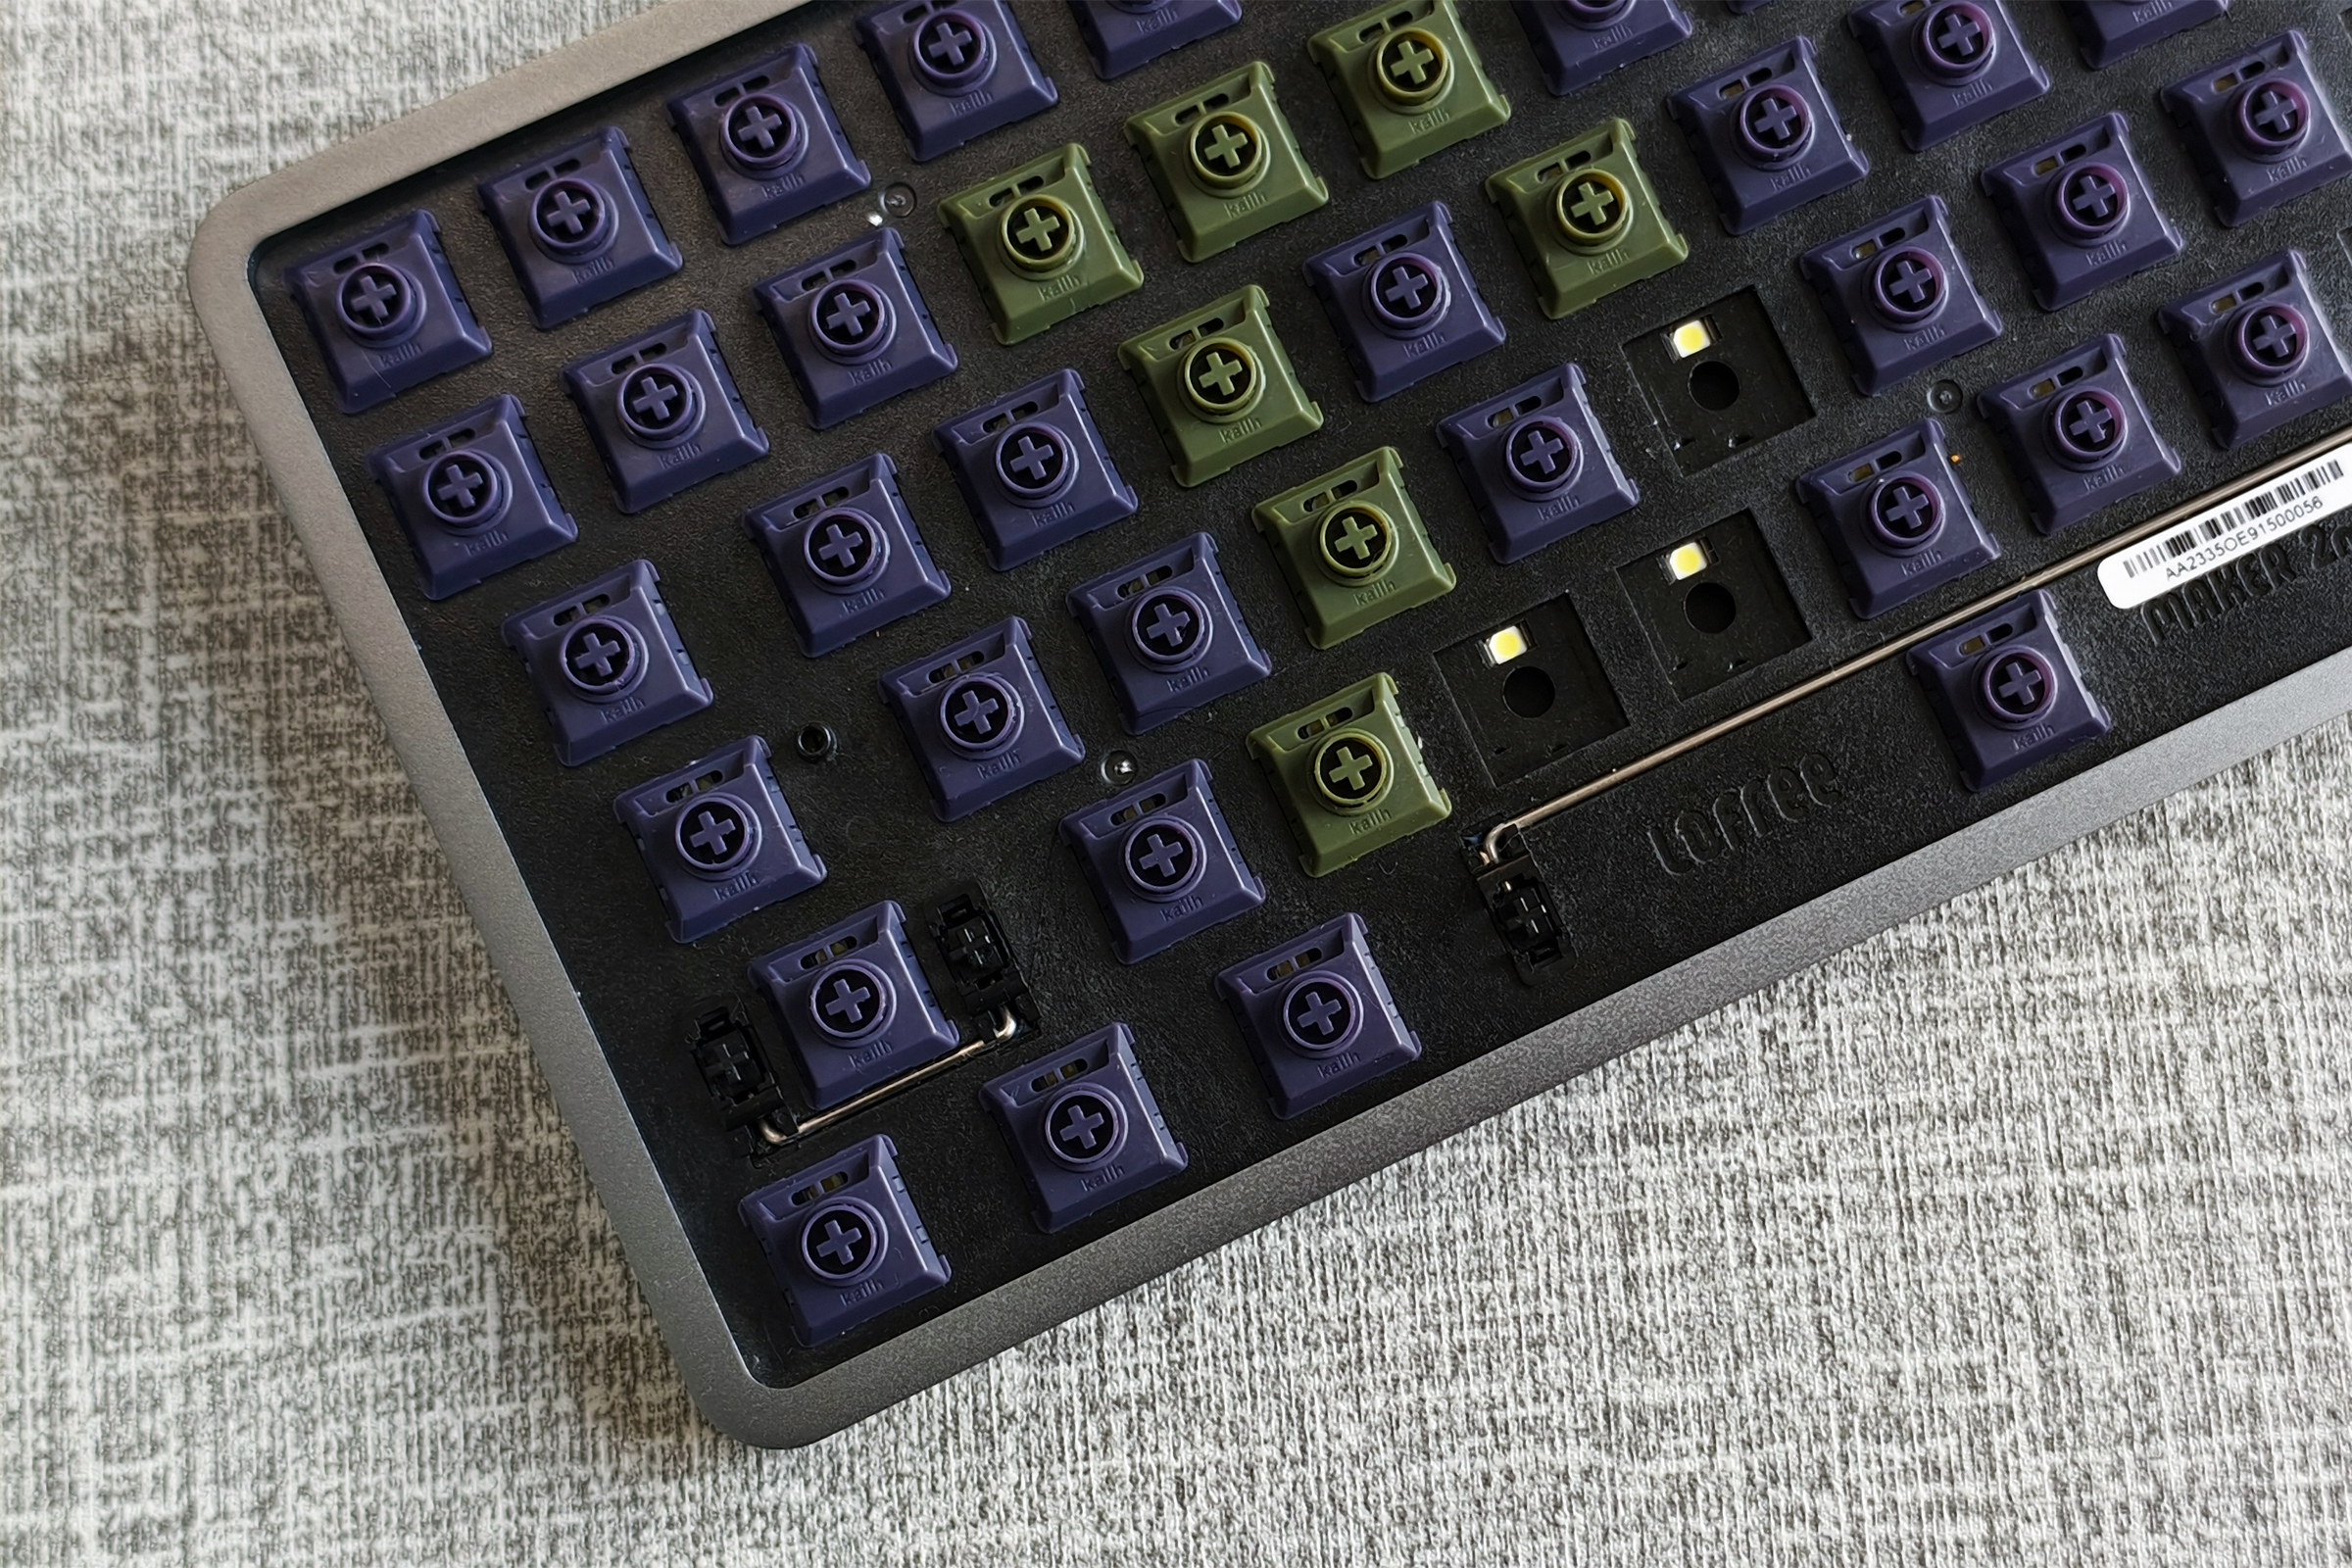 Lofree Flow Kailh Phantom tactile and Ghost linear low profile mechanical keyboard switches on a desk.